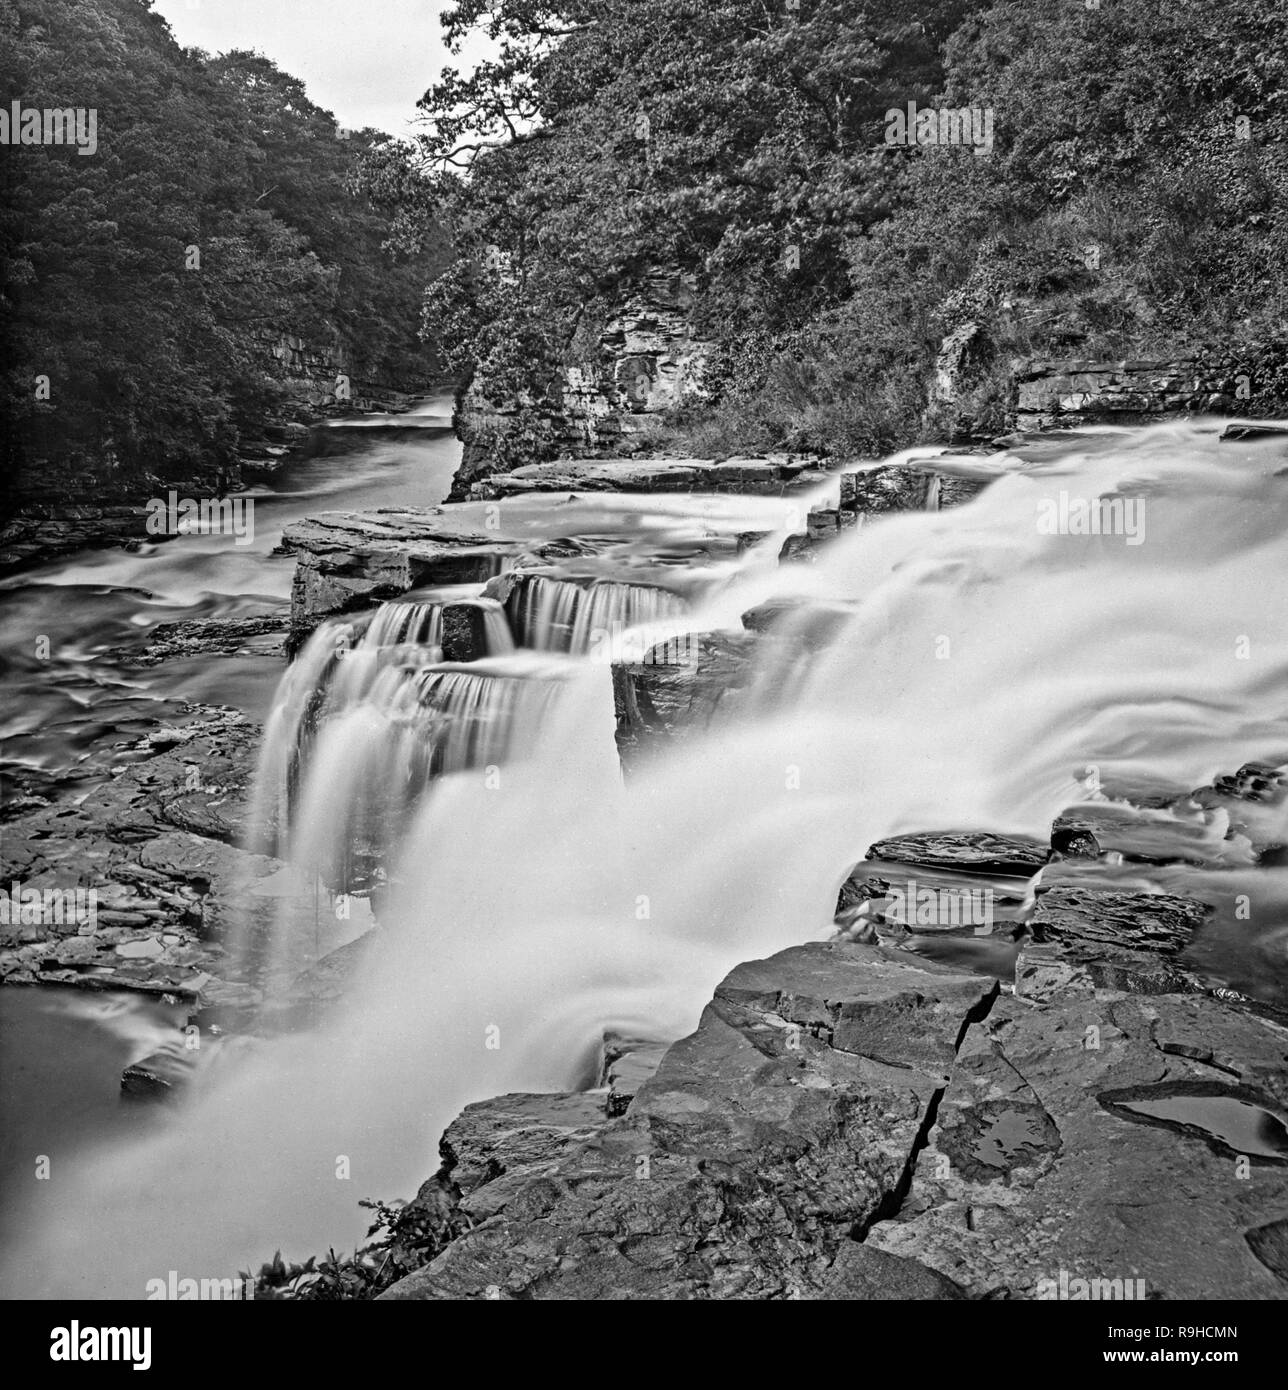 A late Victorian black and white photograph of The Falls Of Clyde.The Falls of Clyde is the collective name of four linn (Scots: waterfalls) on the River Clyde near New Lanark, South Lanarkshire, Scotland. The Falls of Clyde comprise the upper falls of Bonnington Linn, Corra Linn, Dundaff Linn, and the lower falls of Stonebyres Linn. Corra Linn is the highest, with a fall of 84 feet. Bonnington Linn (fall of 30 feet), Corra Linn and Dundaff Linn (fall of 10 feet) are above New Lanark and located within the Falls of Clyde Reserve, now managed by the Scottish Wildlife Trust. Stock Photo